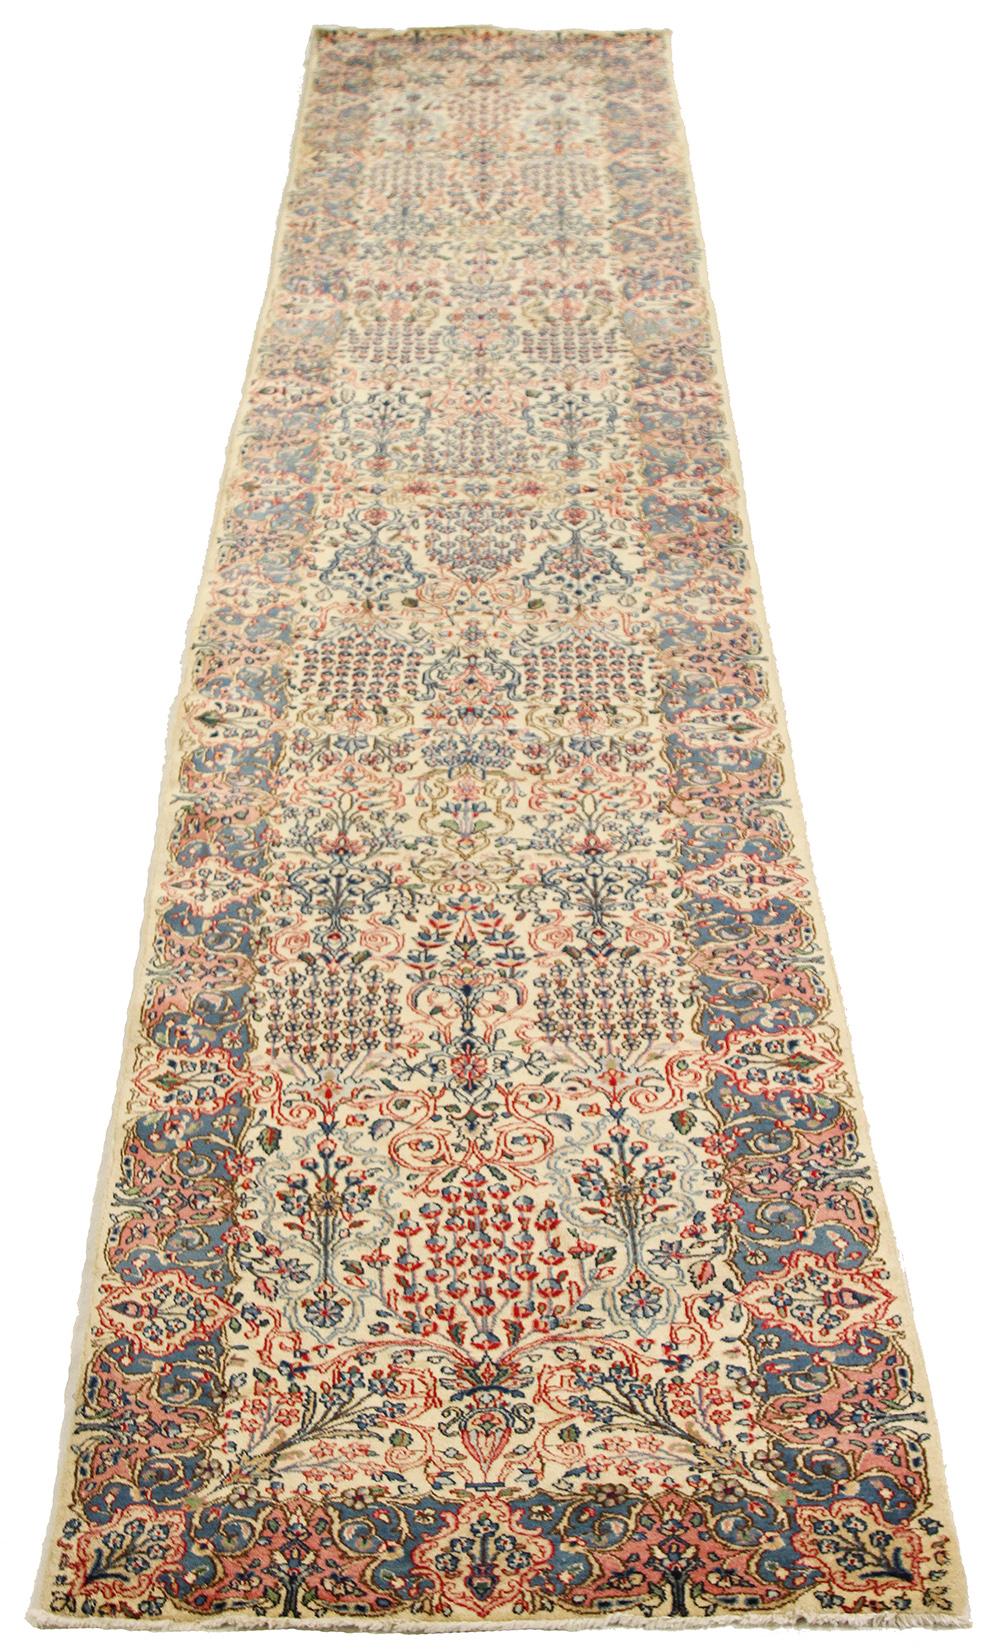 Antique Persian rug handwoven from the finest sheep’s wool and colored with all-natural vegetable dyes that are safe for humans and pets. It’s a traditional Kerman weaving featuring an elegant ensemble of floral designs in red and blue over an ivory